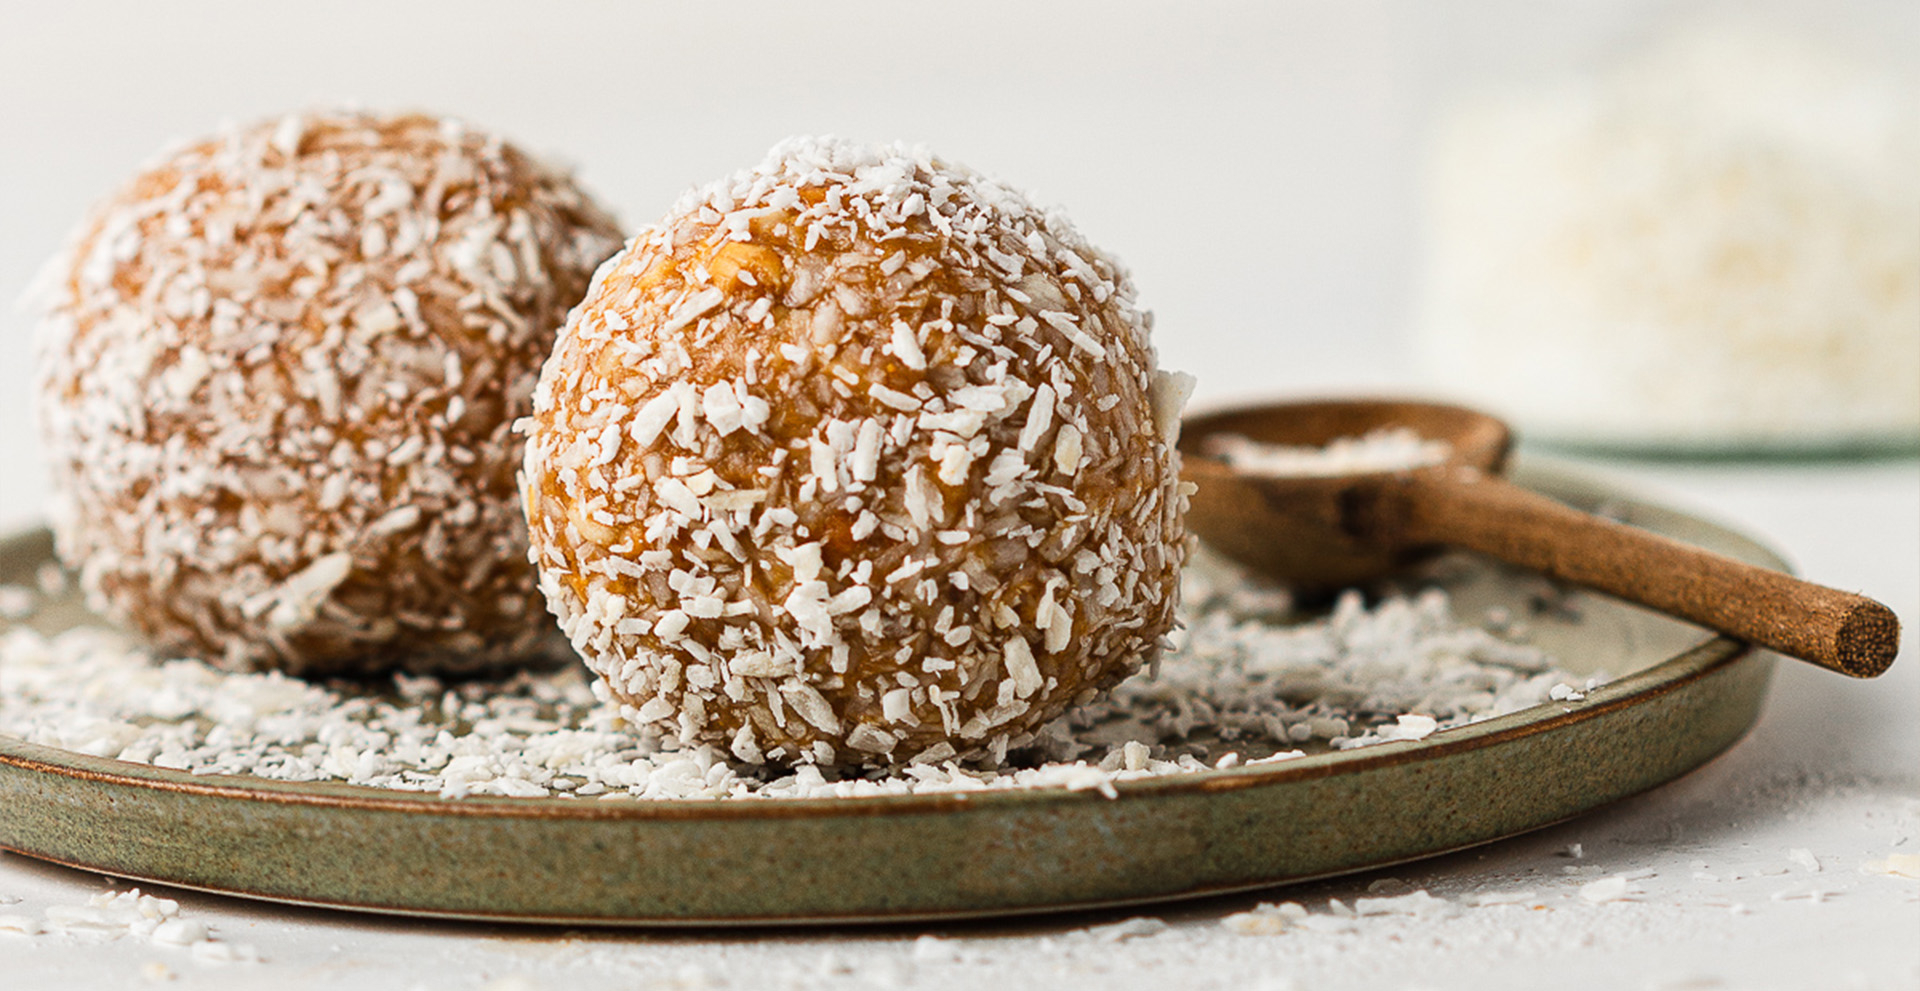 nut balls on plate with coconut powder